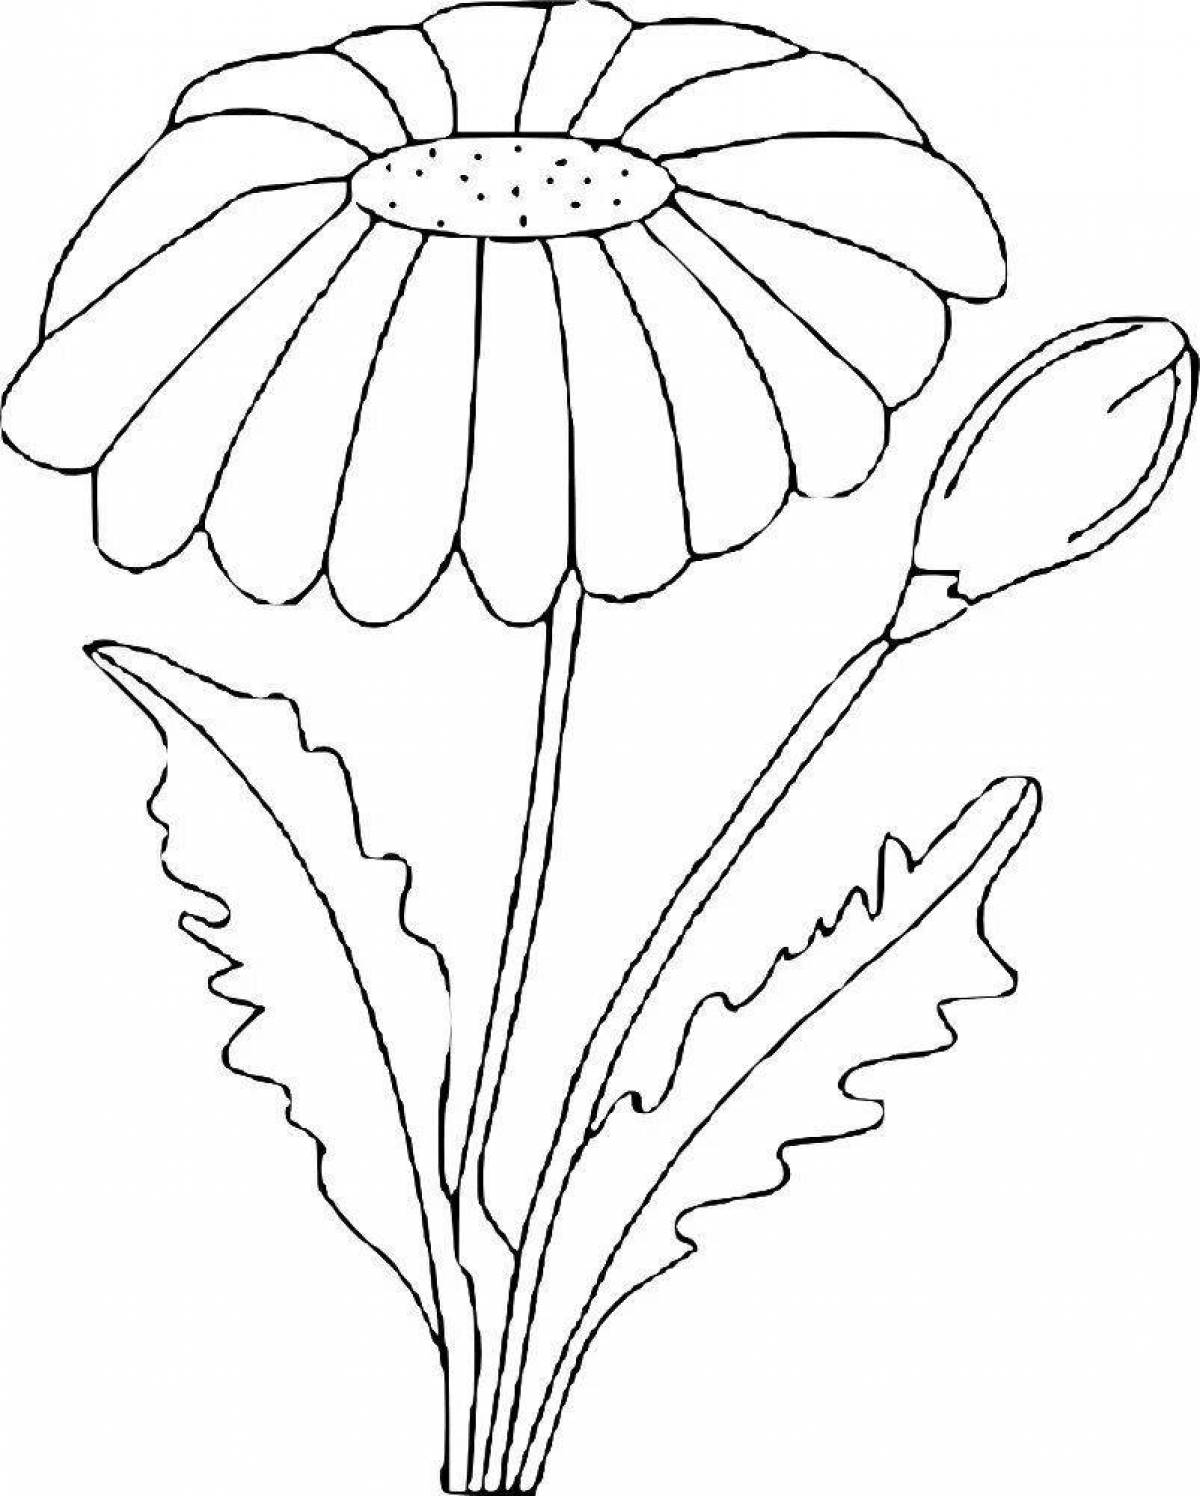 Adorable Daisy Flower Coloring Book for Toddlers